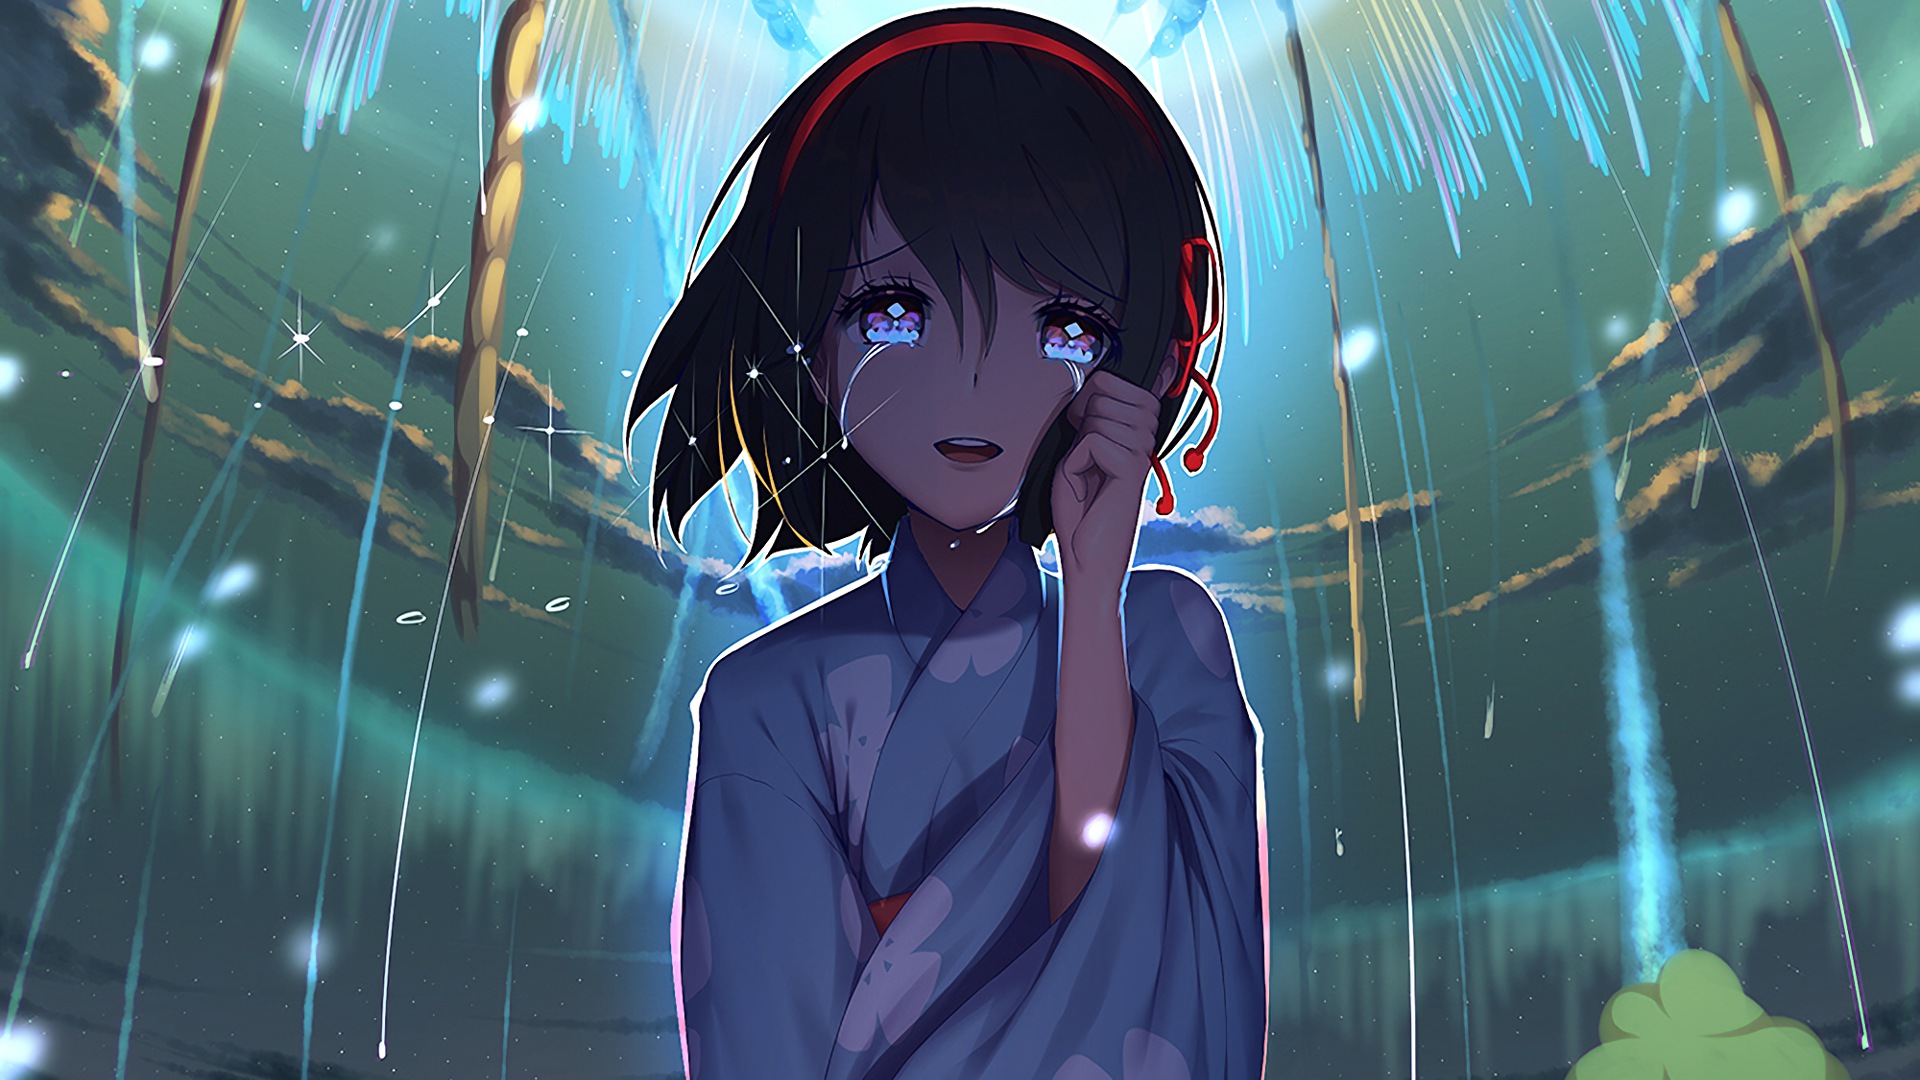 Crying Anime School Girl Sad About Stock Illustration 590334113   Shutterstock